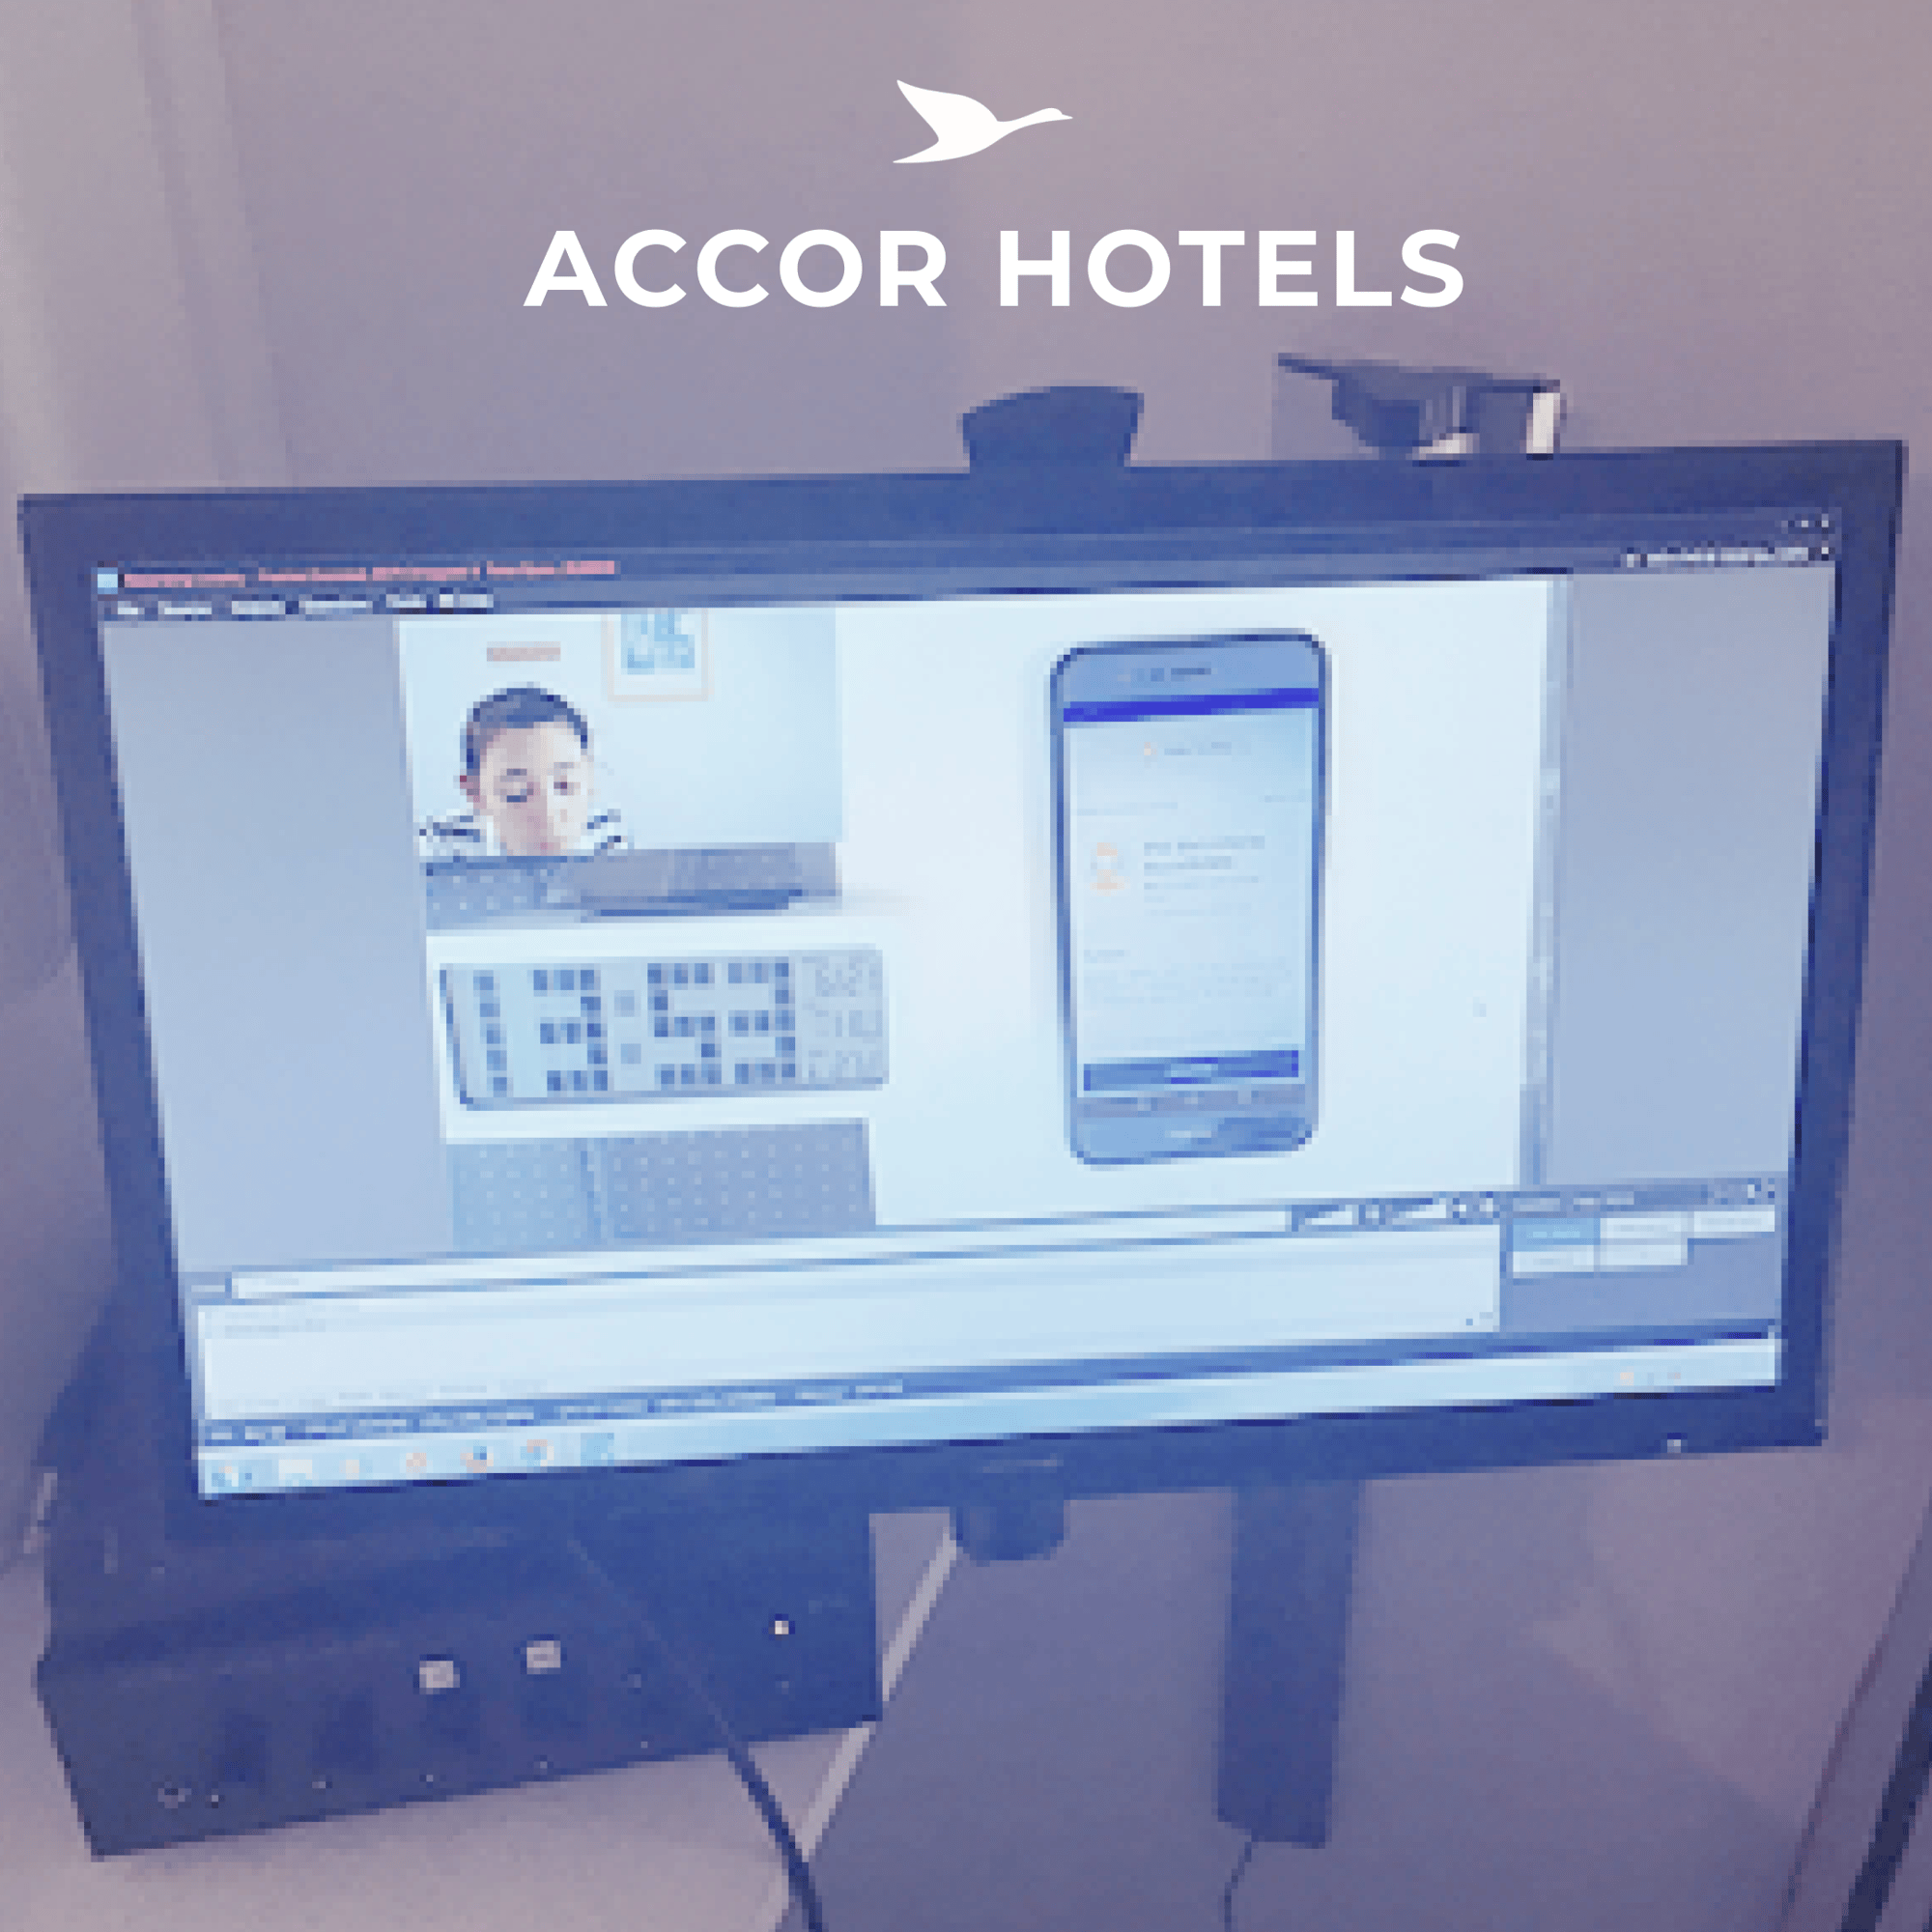 CX Research - Accor Hotels